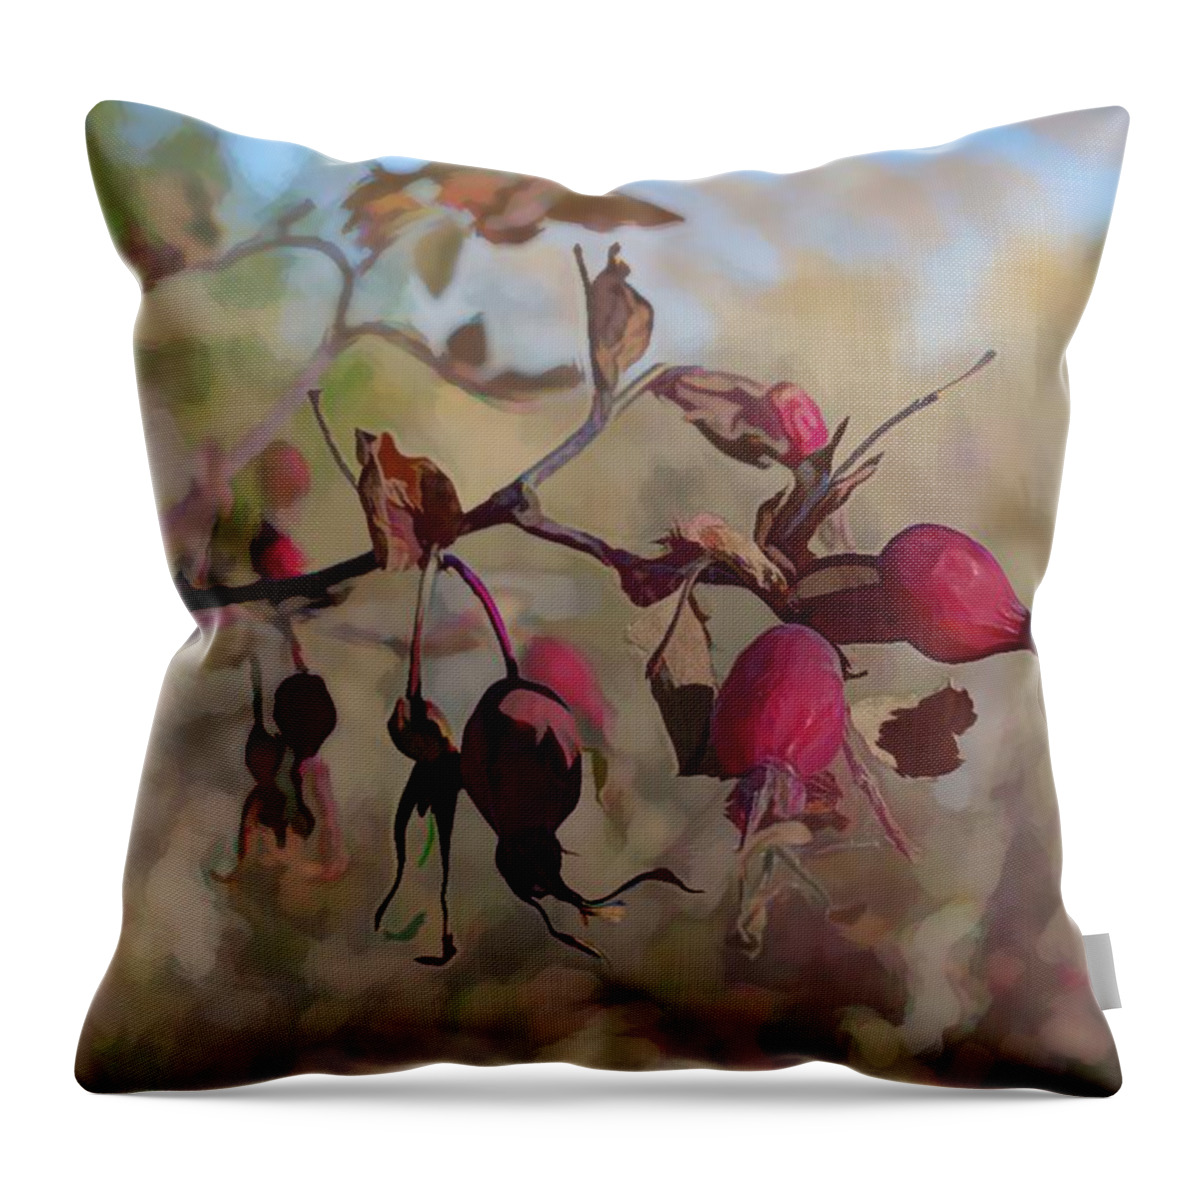  Throw Pillow featuring the photograph Prickly Rose Hips by Cathy Mahnke